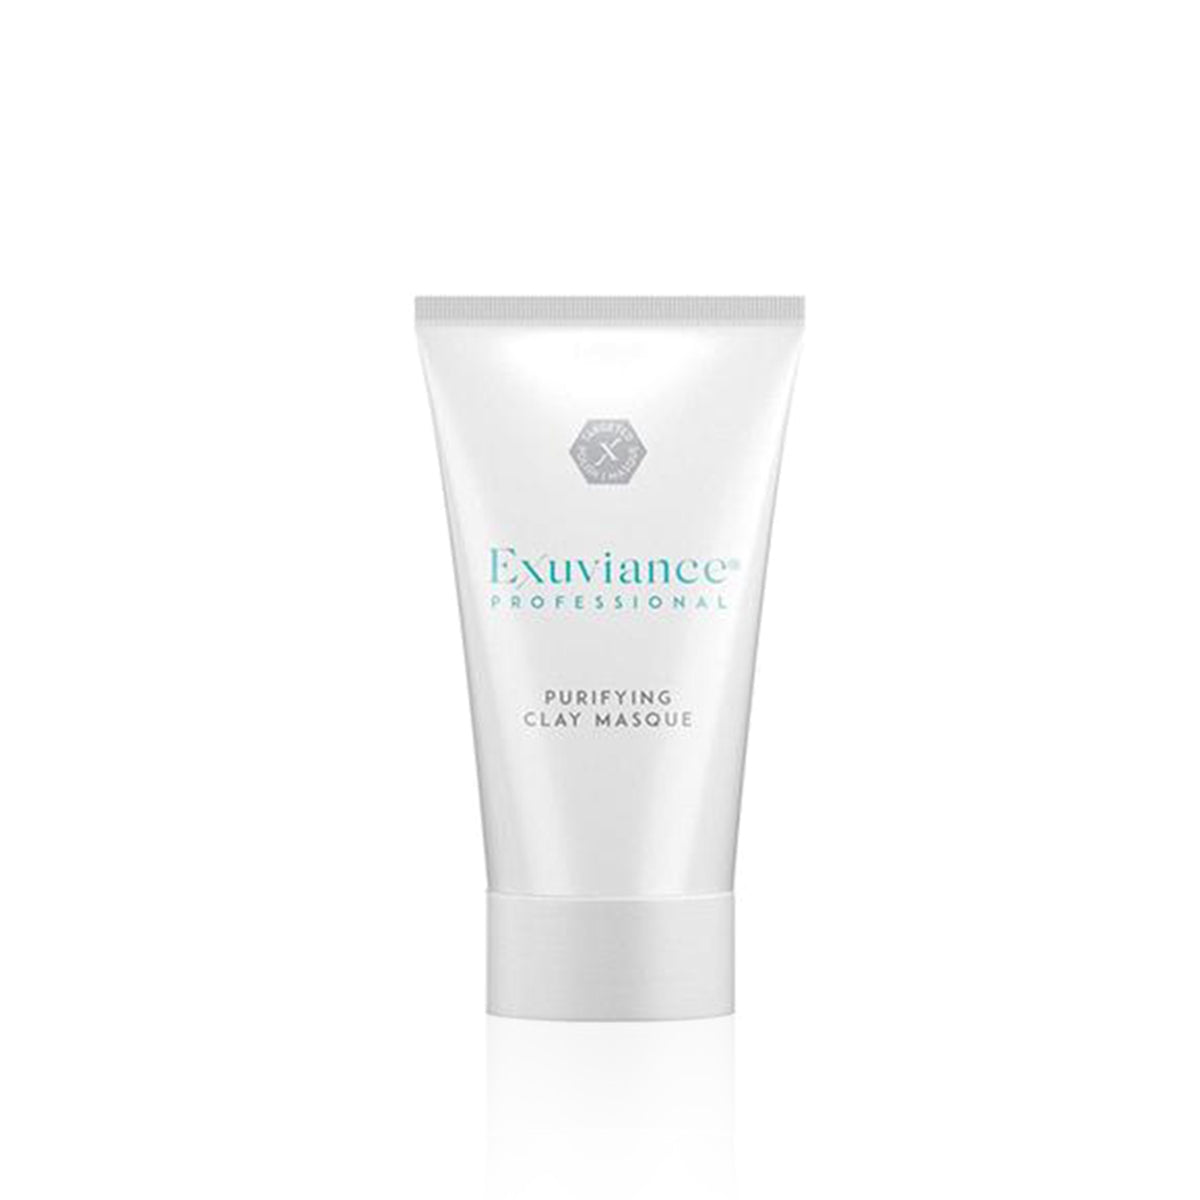 Exuviance 深層潔淨更生面膜 | Purifying Clay Masque 50g
– FACEMART